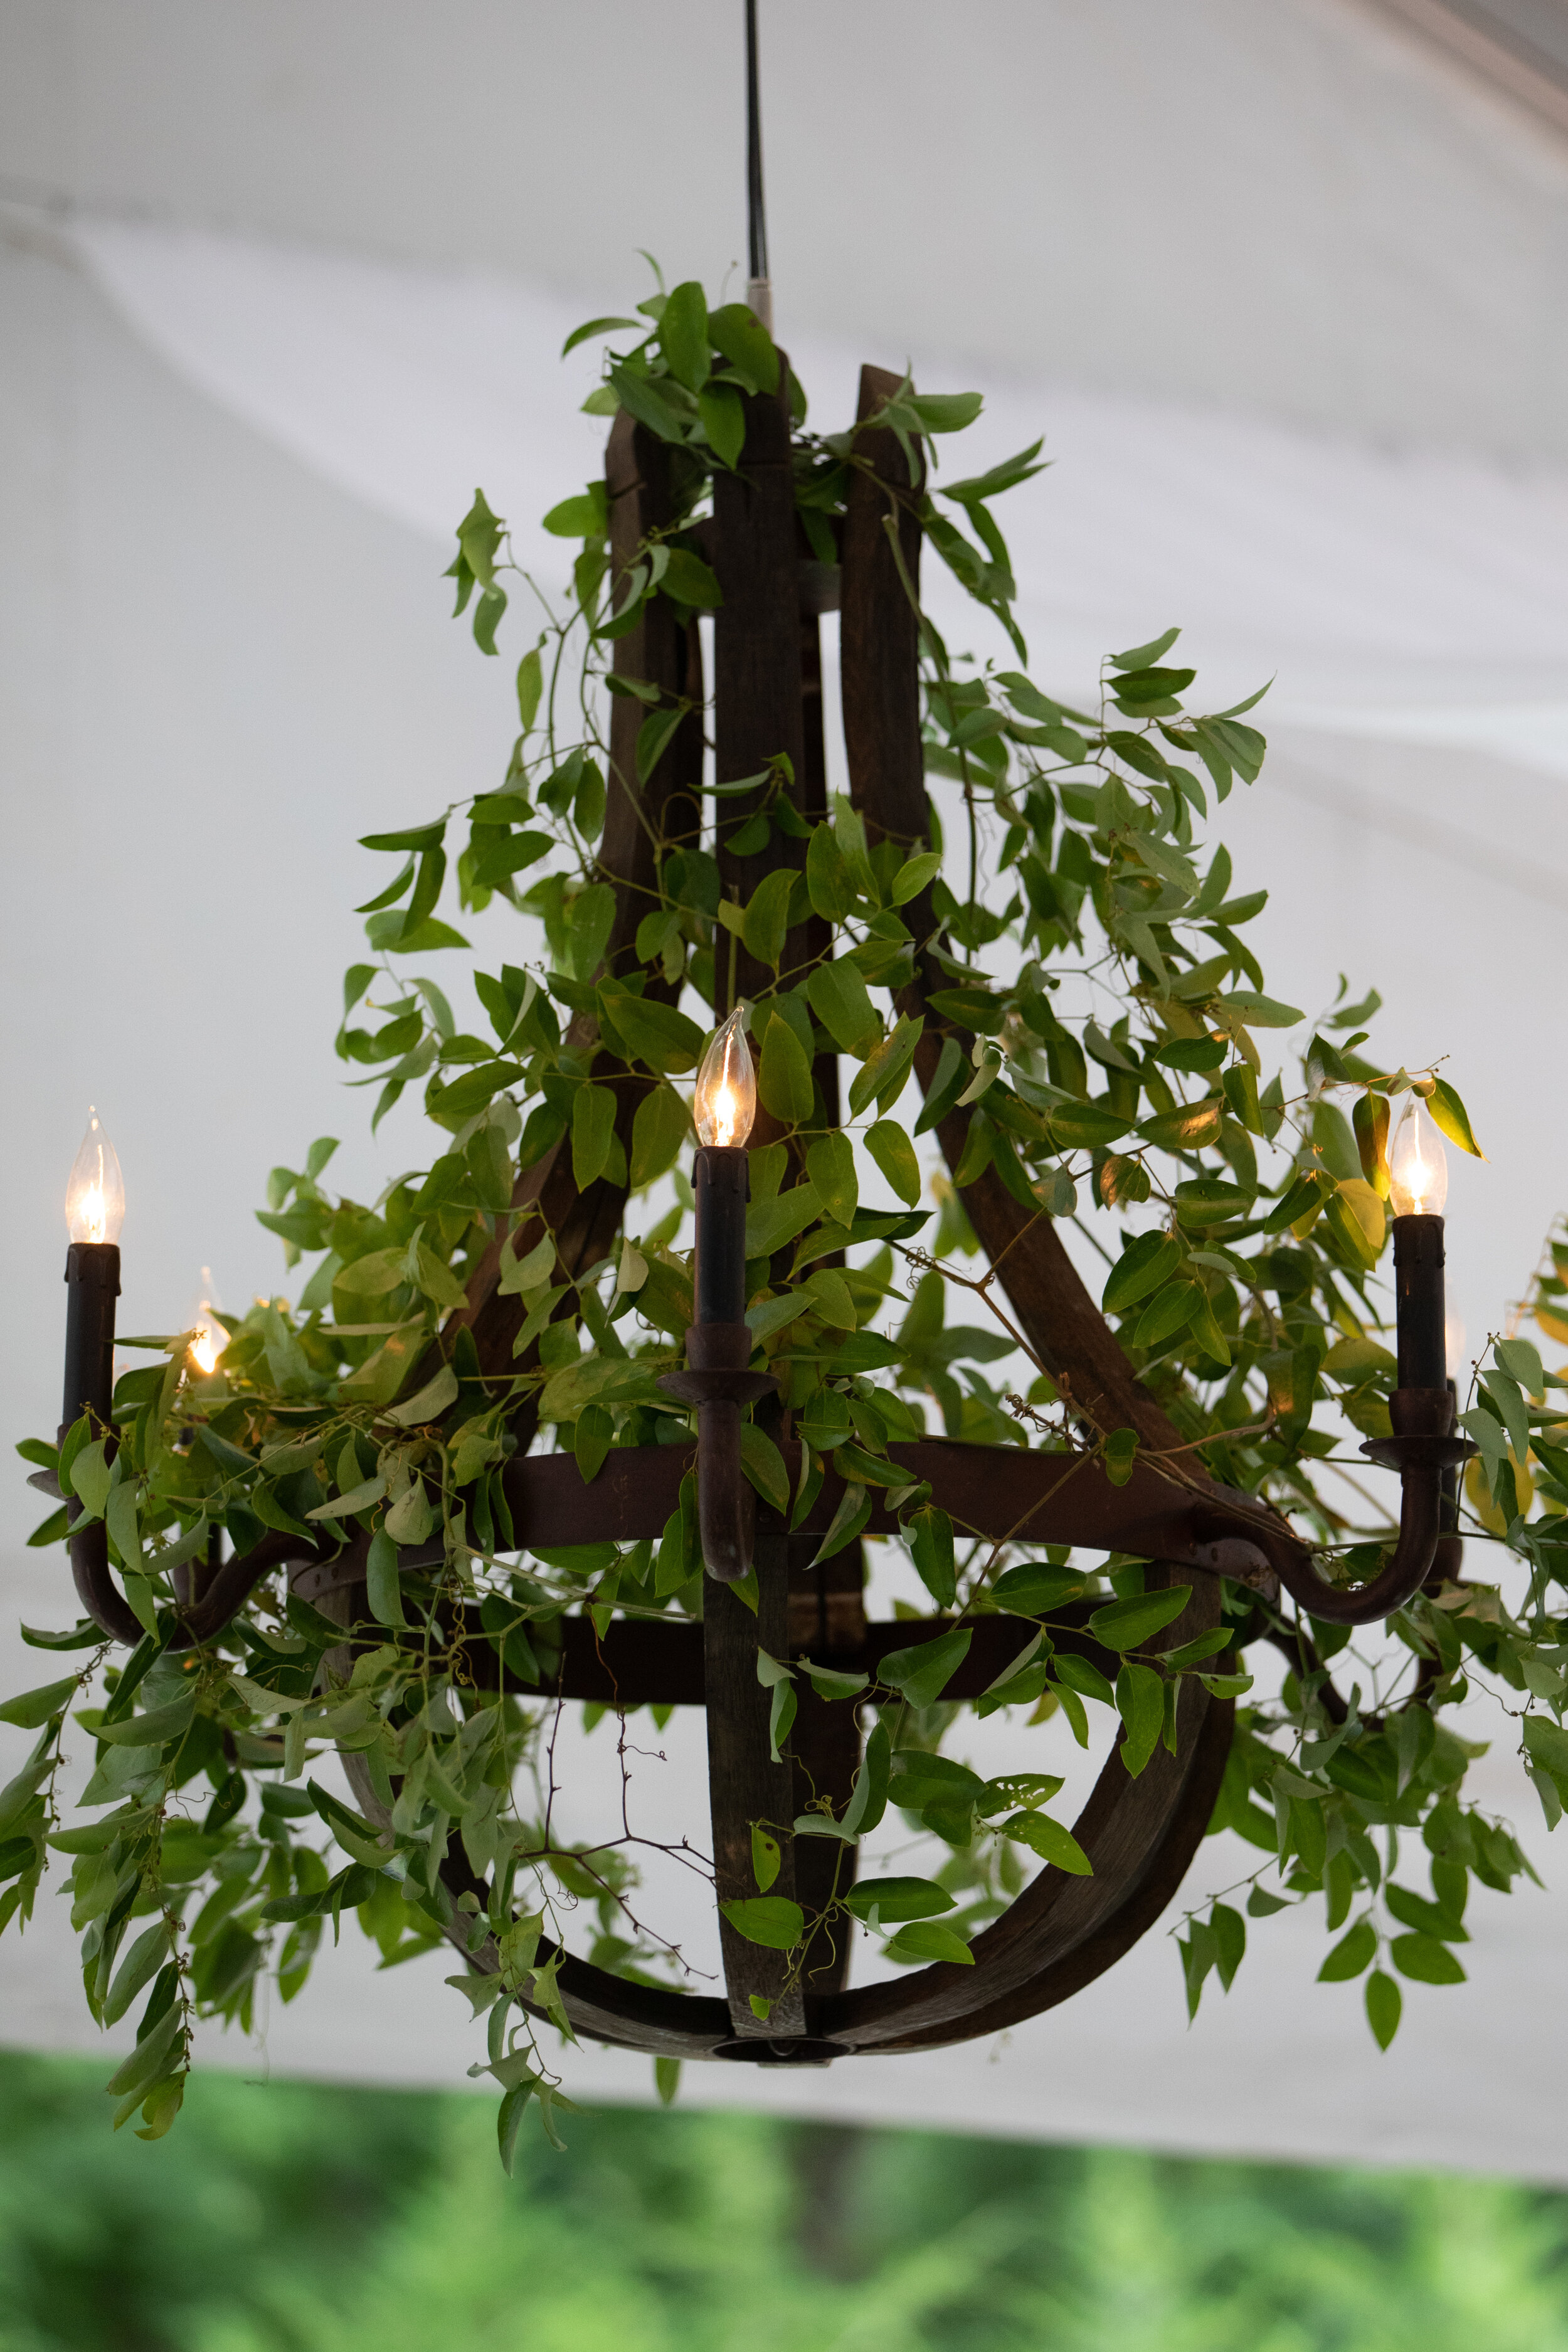 Chandelier with lush vines in the tent at Belle Meade Plantation. Nashville wedding and event florist.